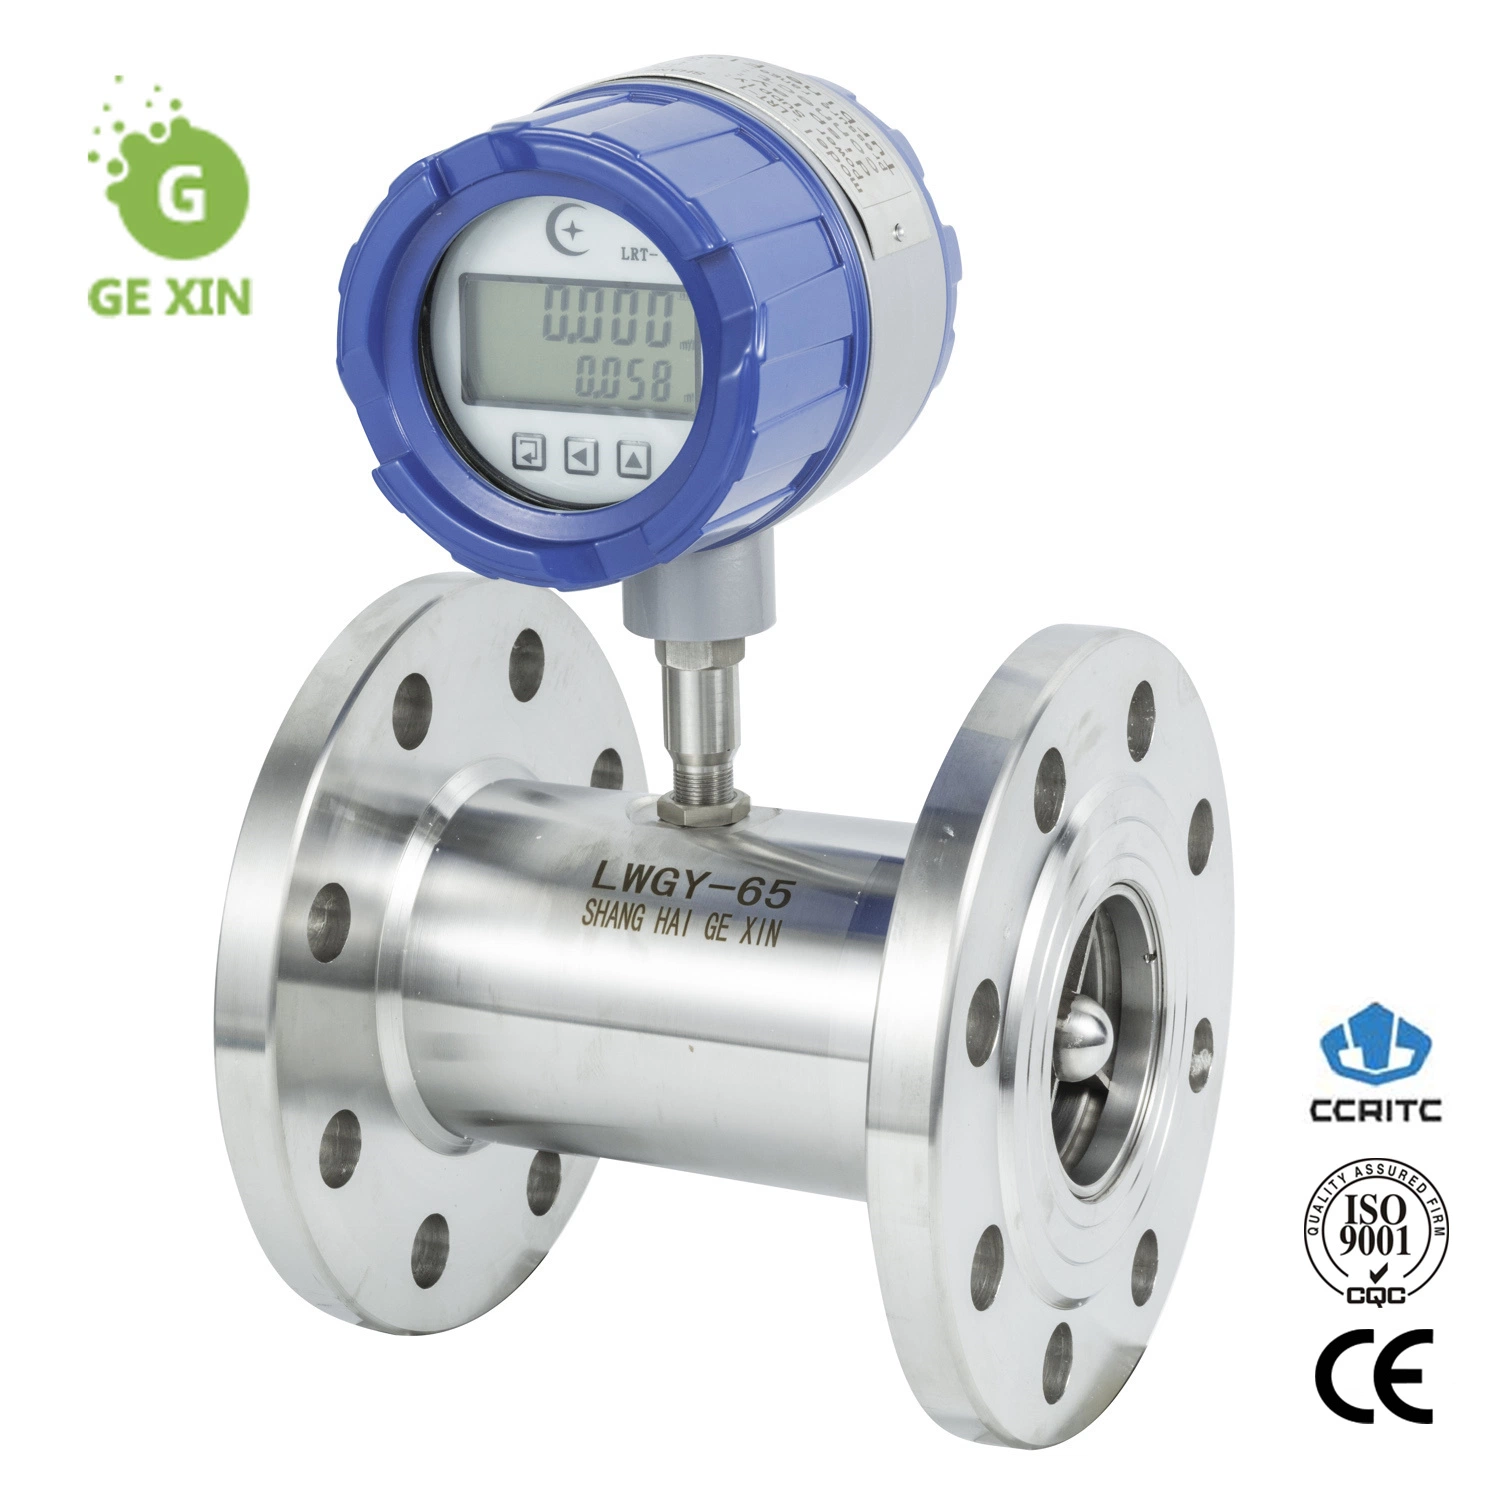 Local Display DN20 4-20mA Water Output High Pressure Connection Turbine Flow Meter